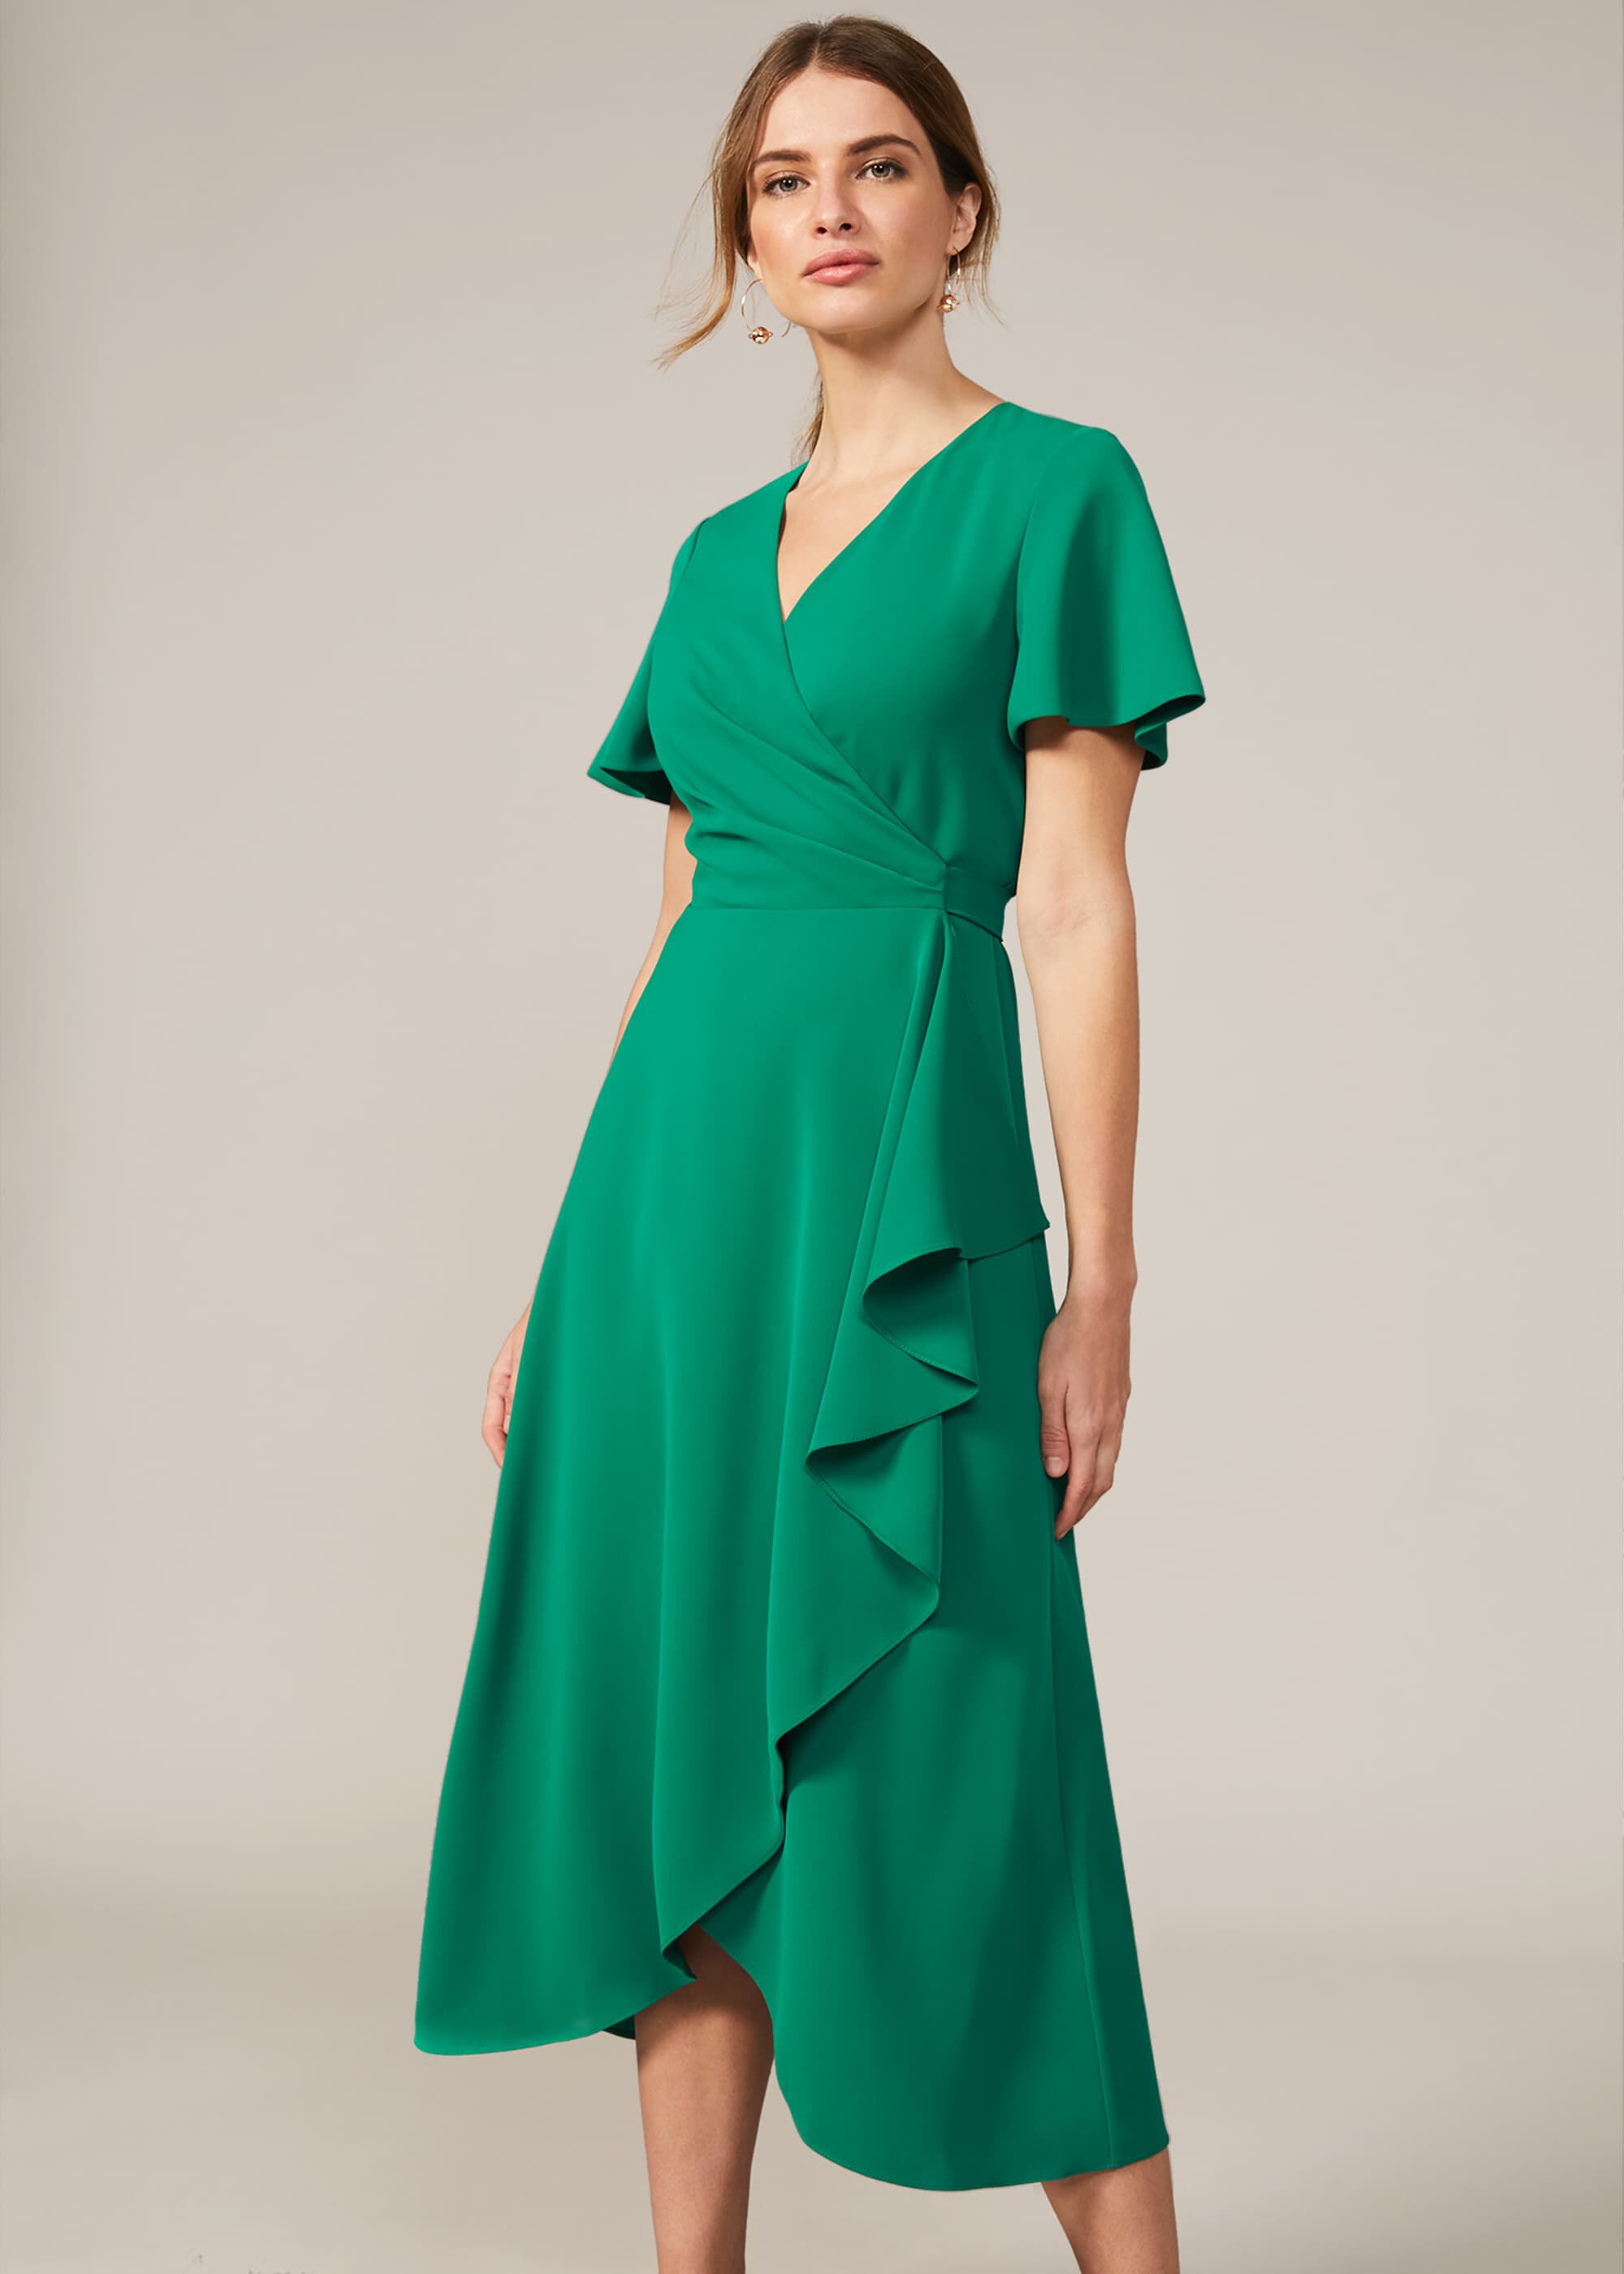 phase eight dresses wedding guest